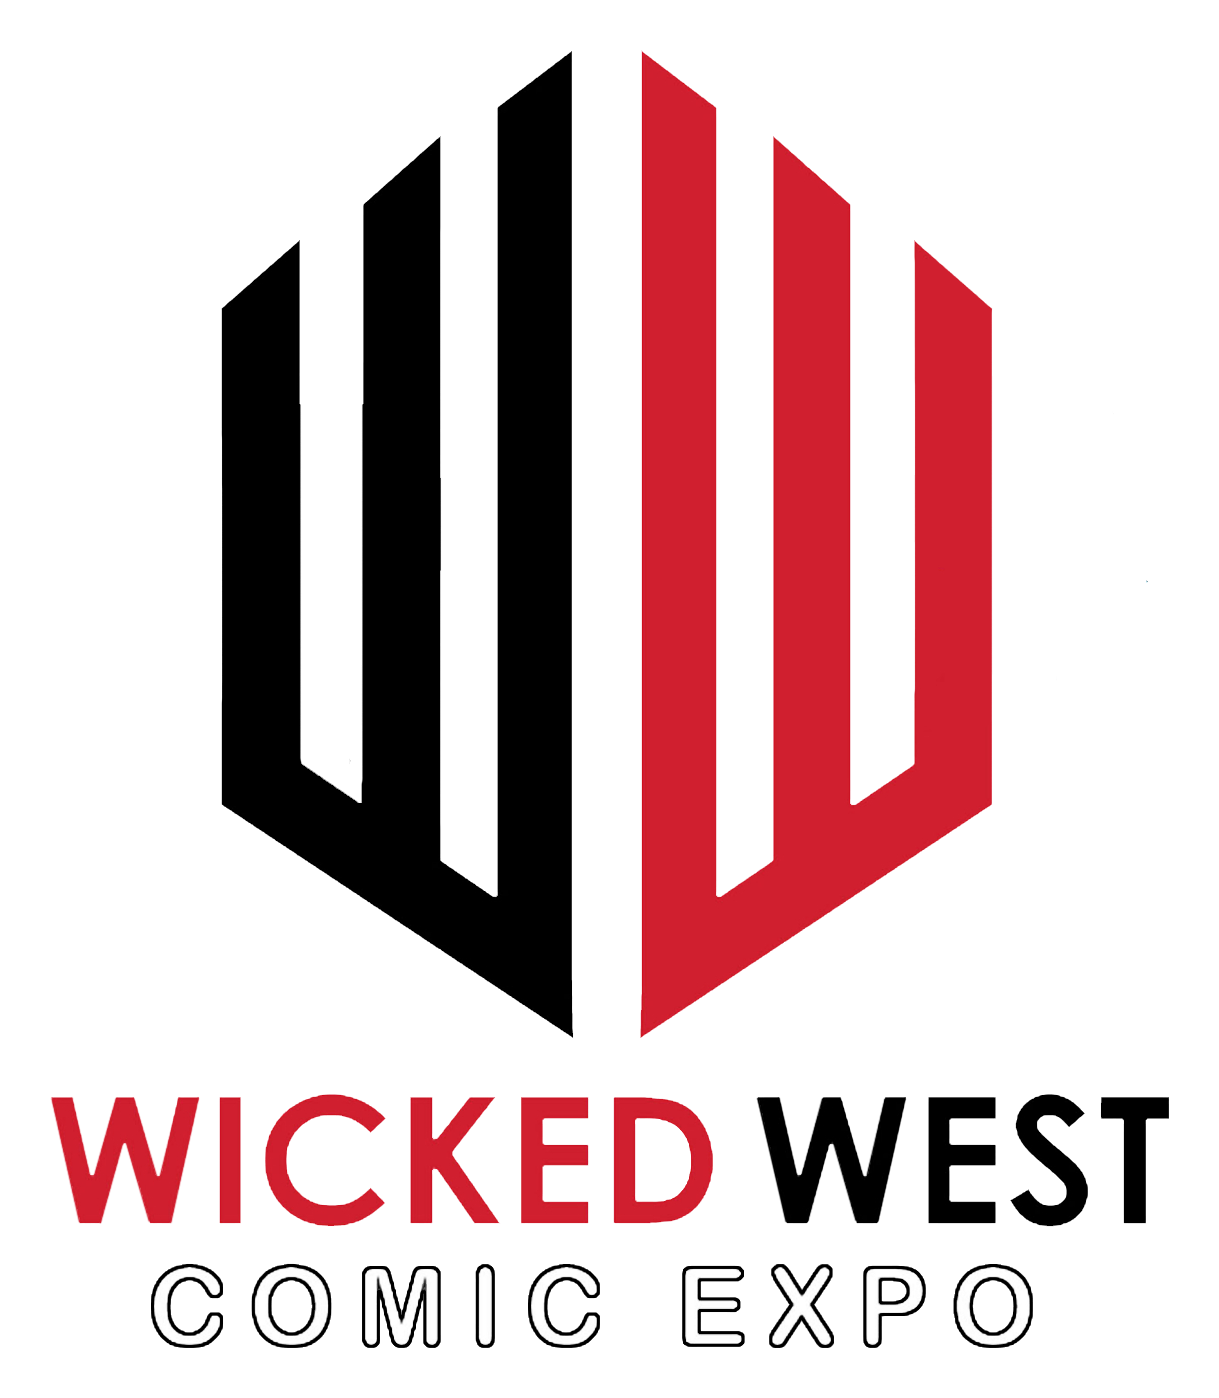 Wicked West Comic Expo